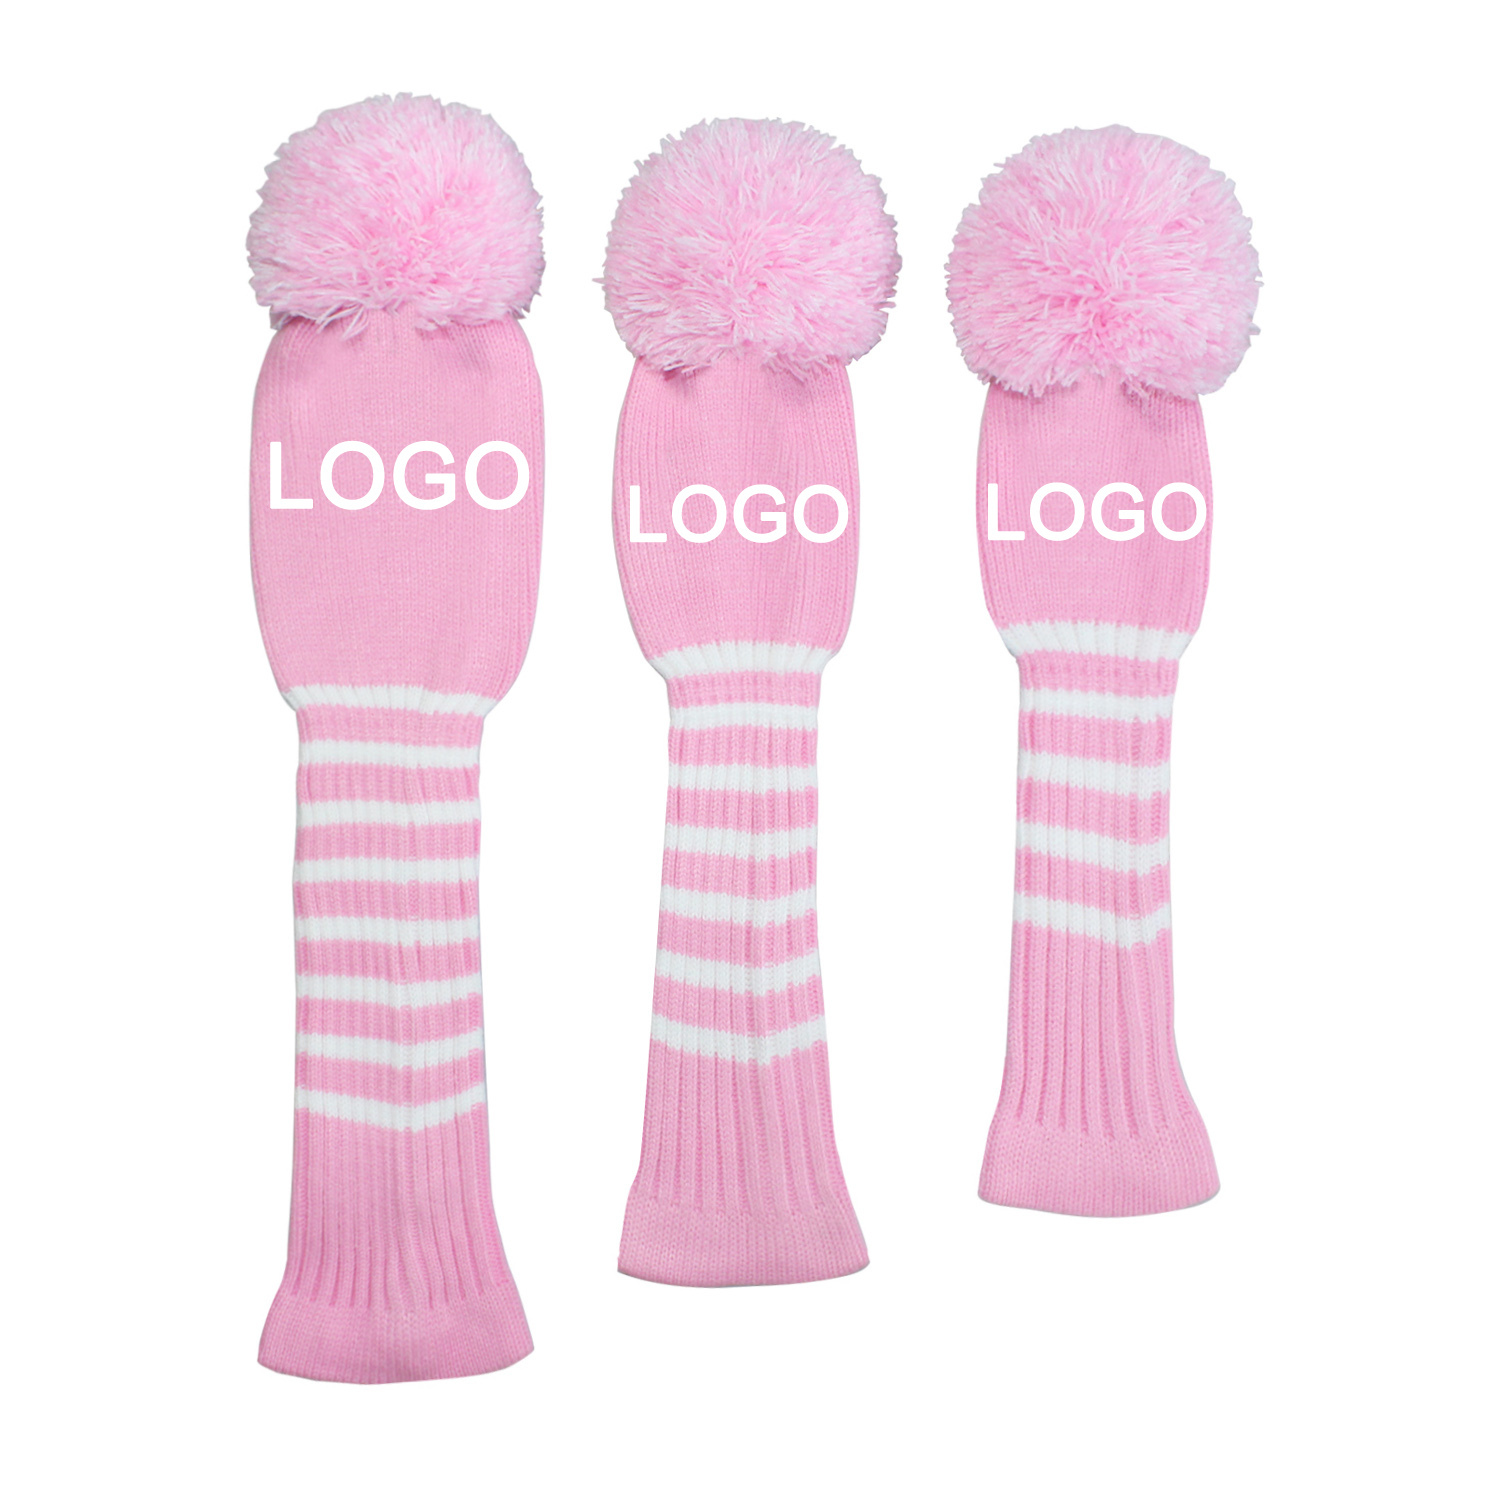 Scott Edward Custom Pom Pom Golf Head Covers Fit Max Drivers Fairways Hybrids/Utility with Rotating Number Tags (Pink)